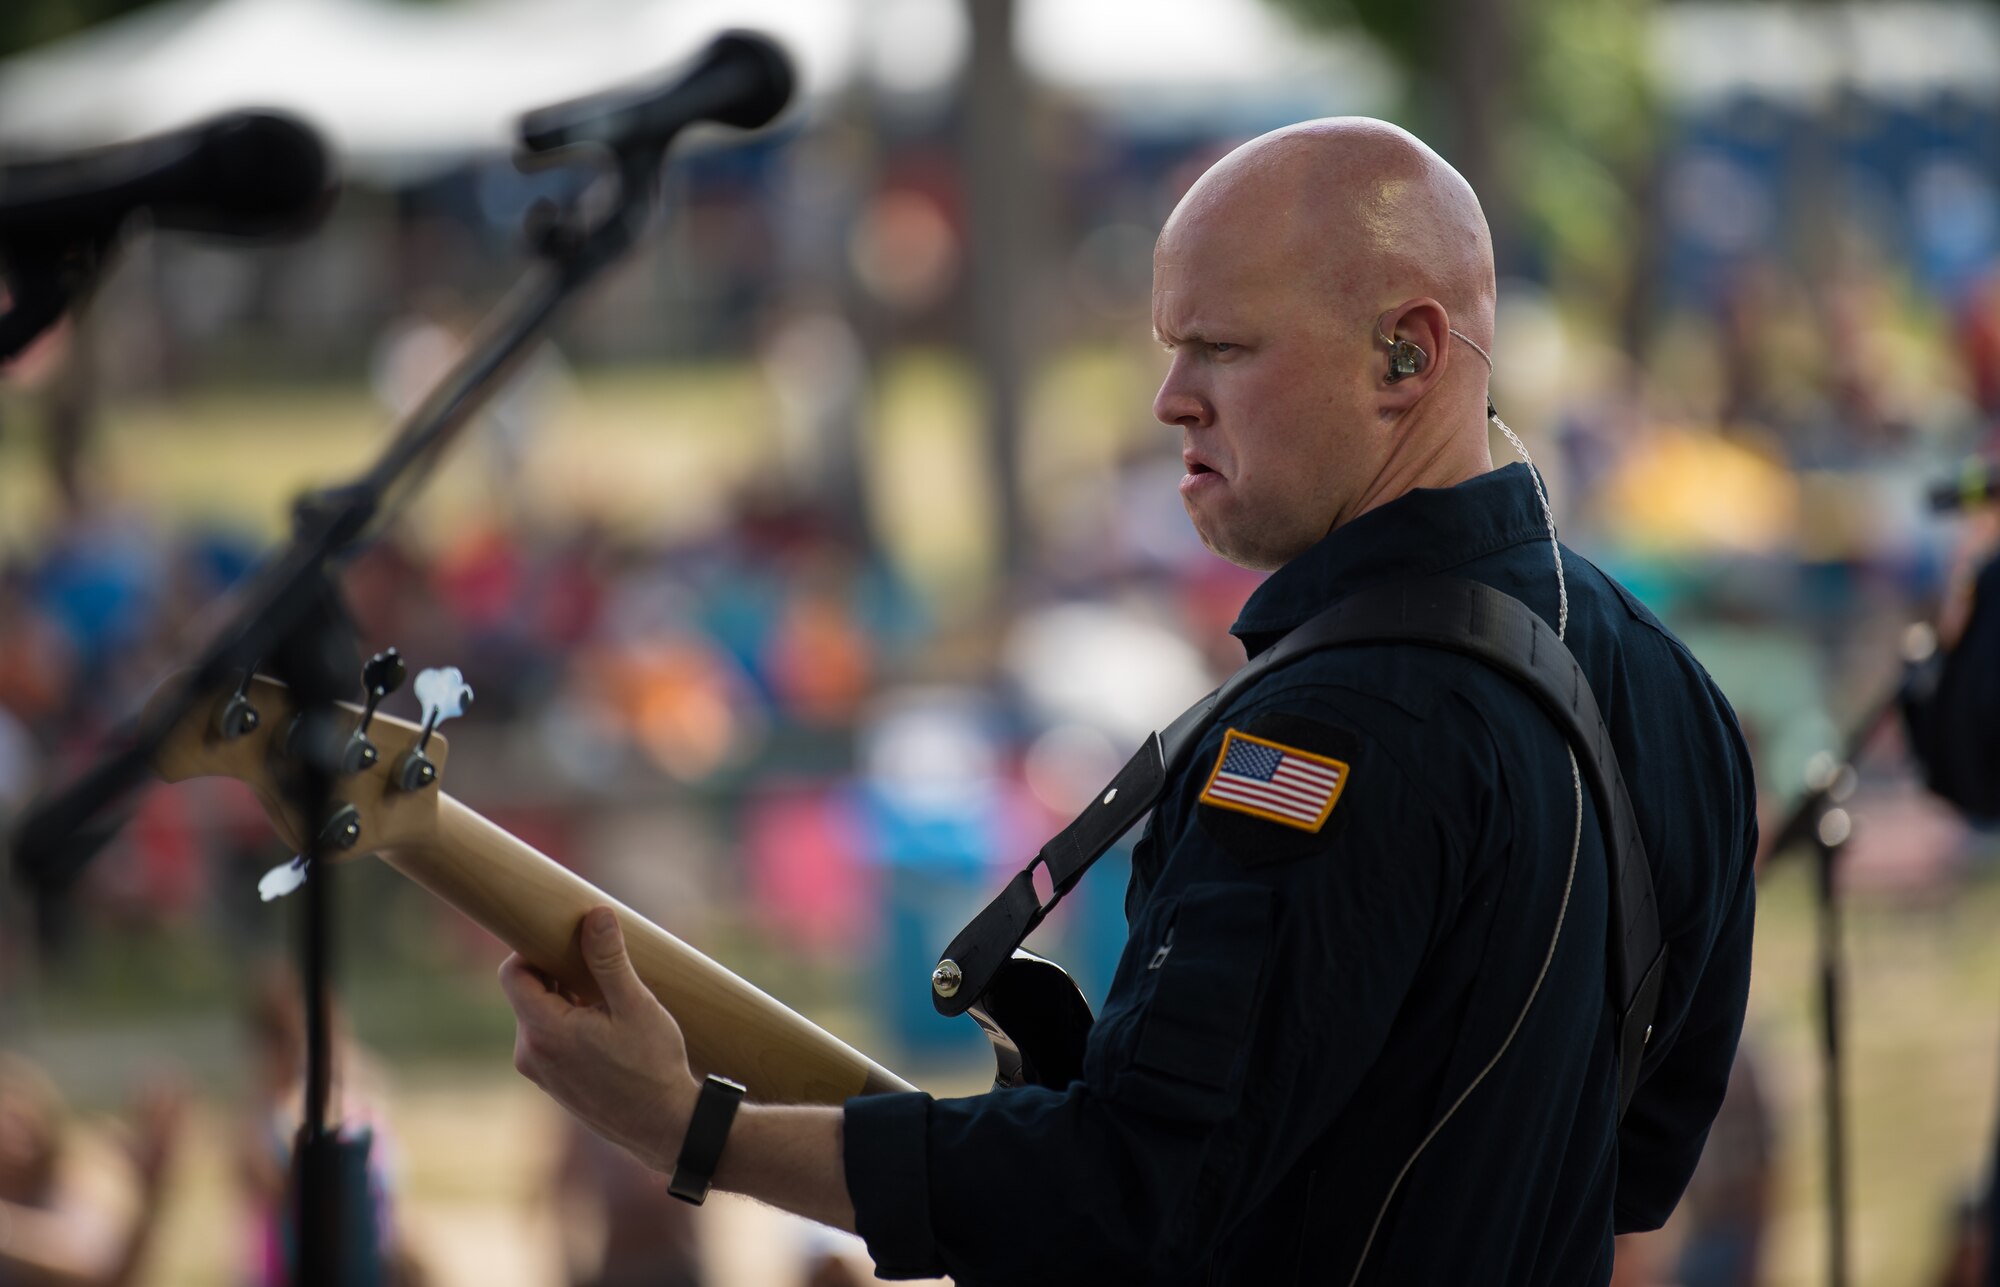 Technical Sgt. Mike Wittrien, bassist with Max Impact, performs at the Armed Forces Tribute for the 2019 Suwannee River Jam. This event took place at the Spirit of the Suwannee Music Park on Saturday, May 4, 2019. (U.S. Air Force Photo by Chief Master Sgt. Kevin Burns)